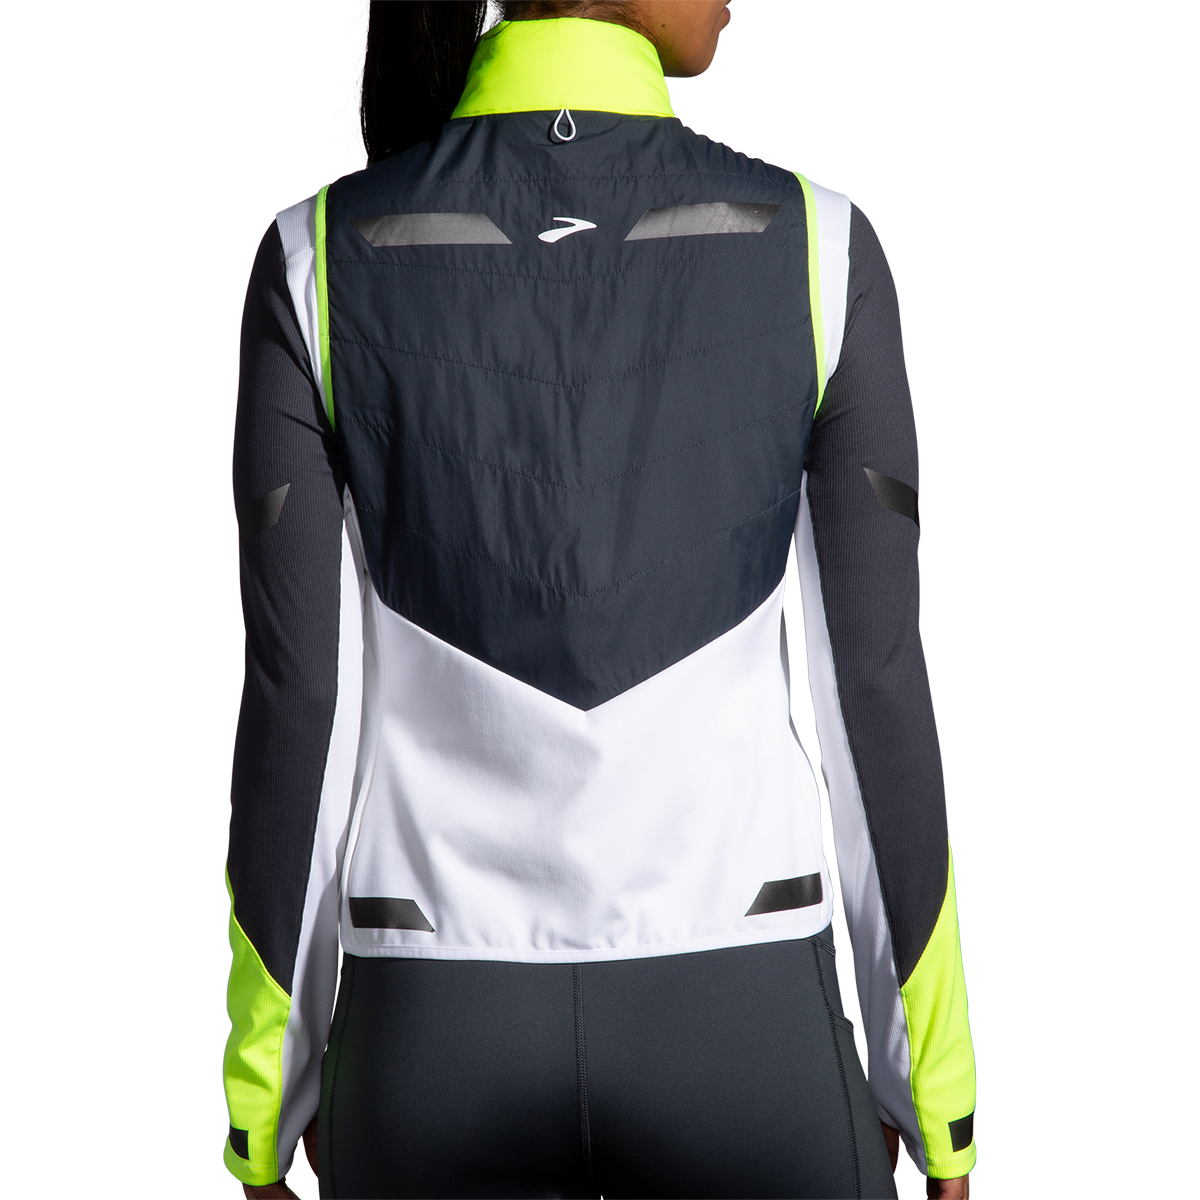 Brooks Run Visible Insulated Vest, , large image number null